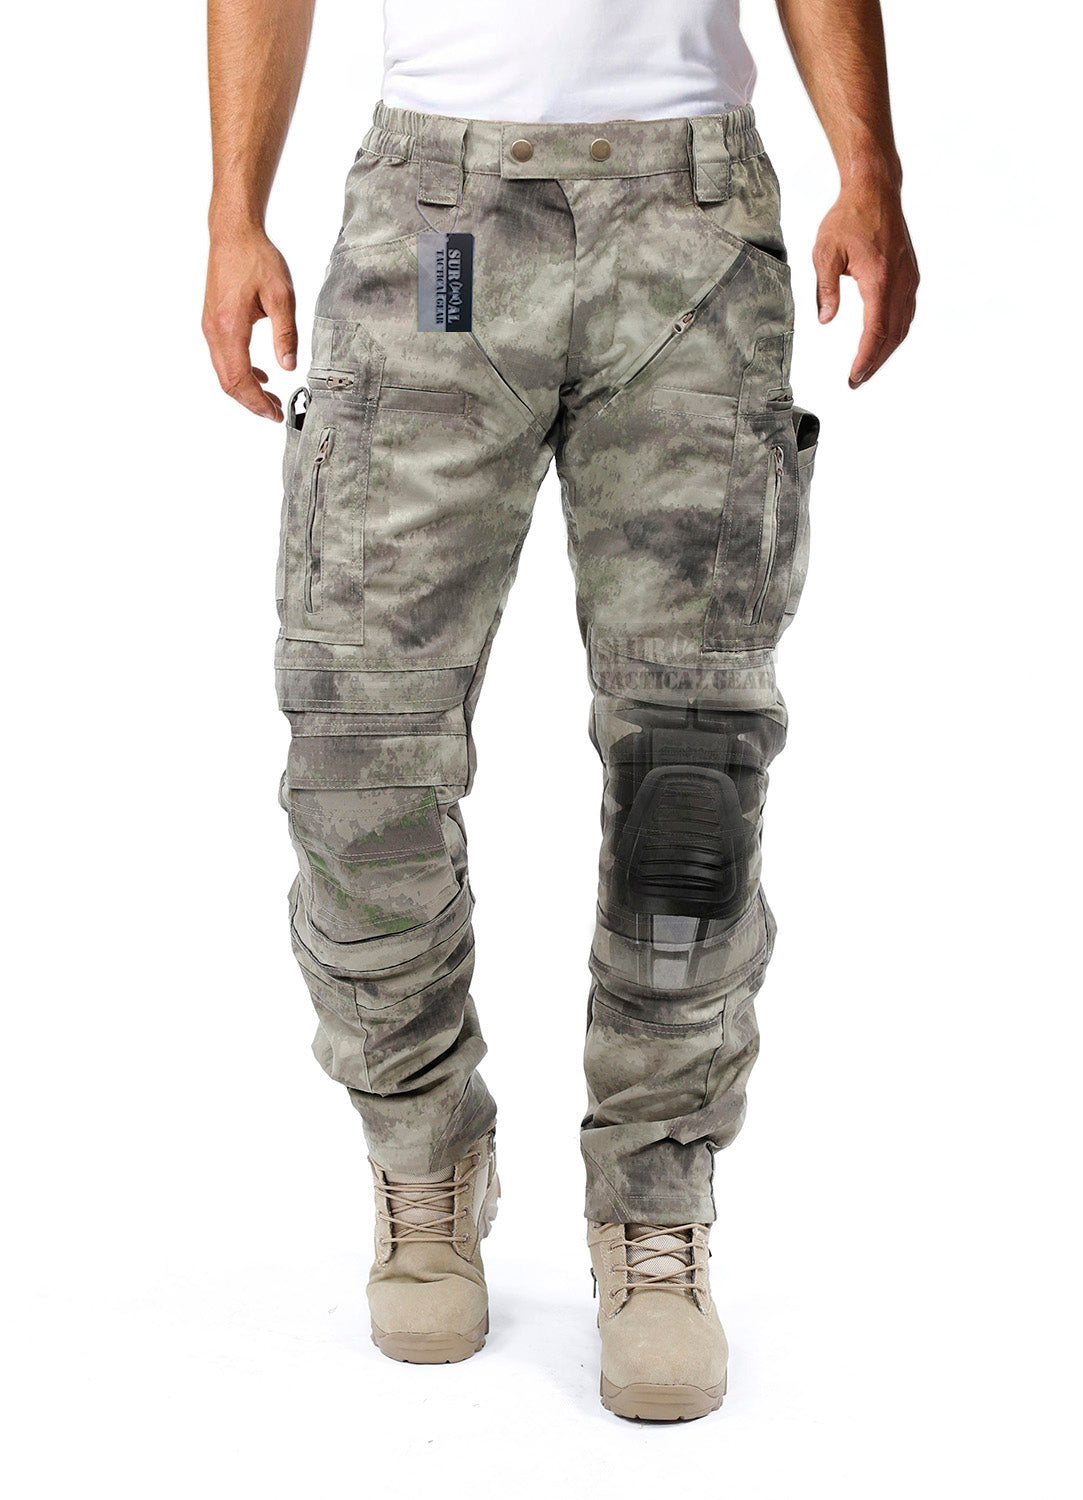 Tactical Pants with Knee Protection System & Air Circulation System –  ZAPTGEAR